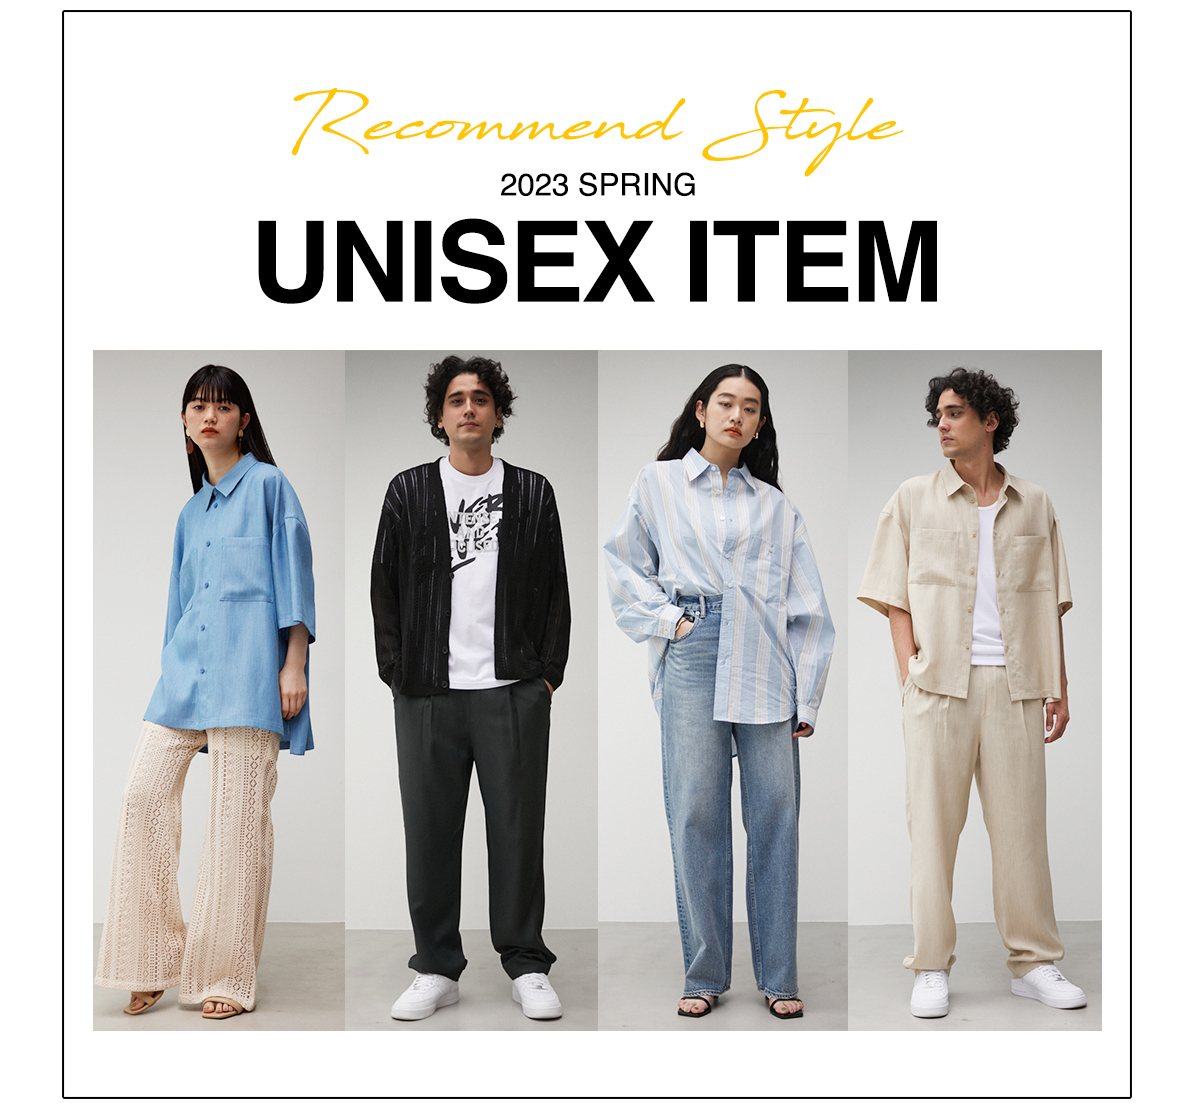 Recommend Style 2023 SPRING UNISEX ITEM